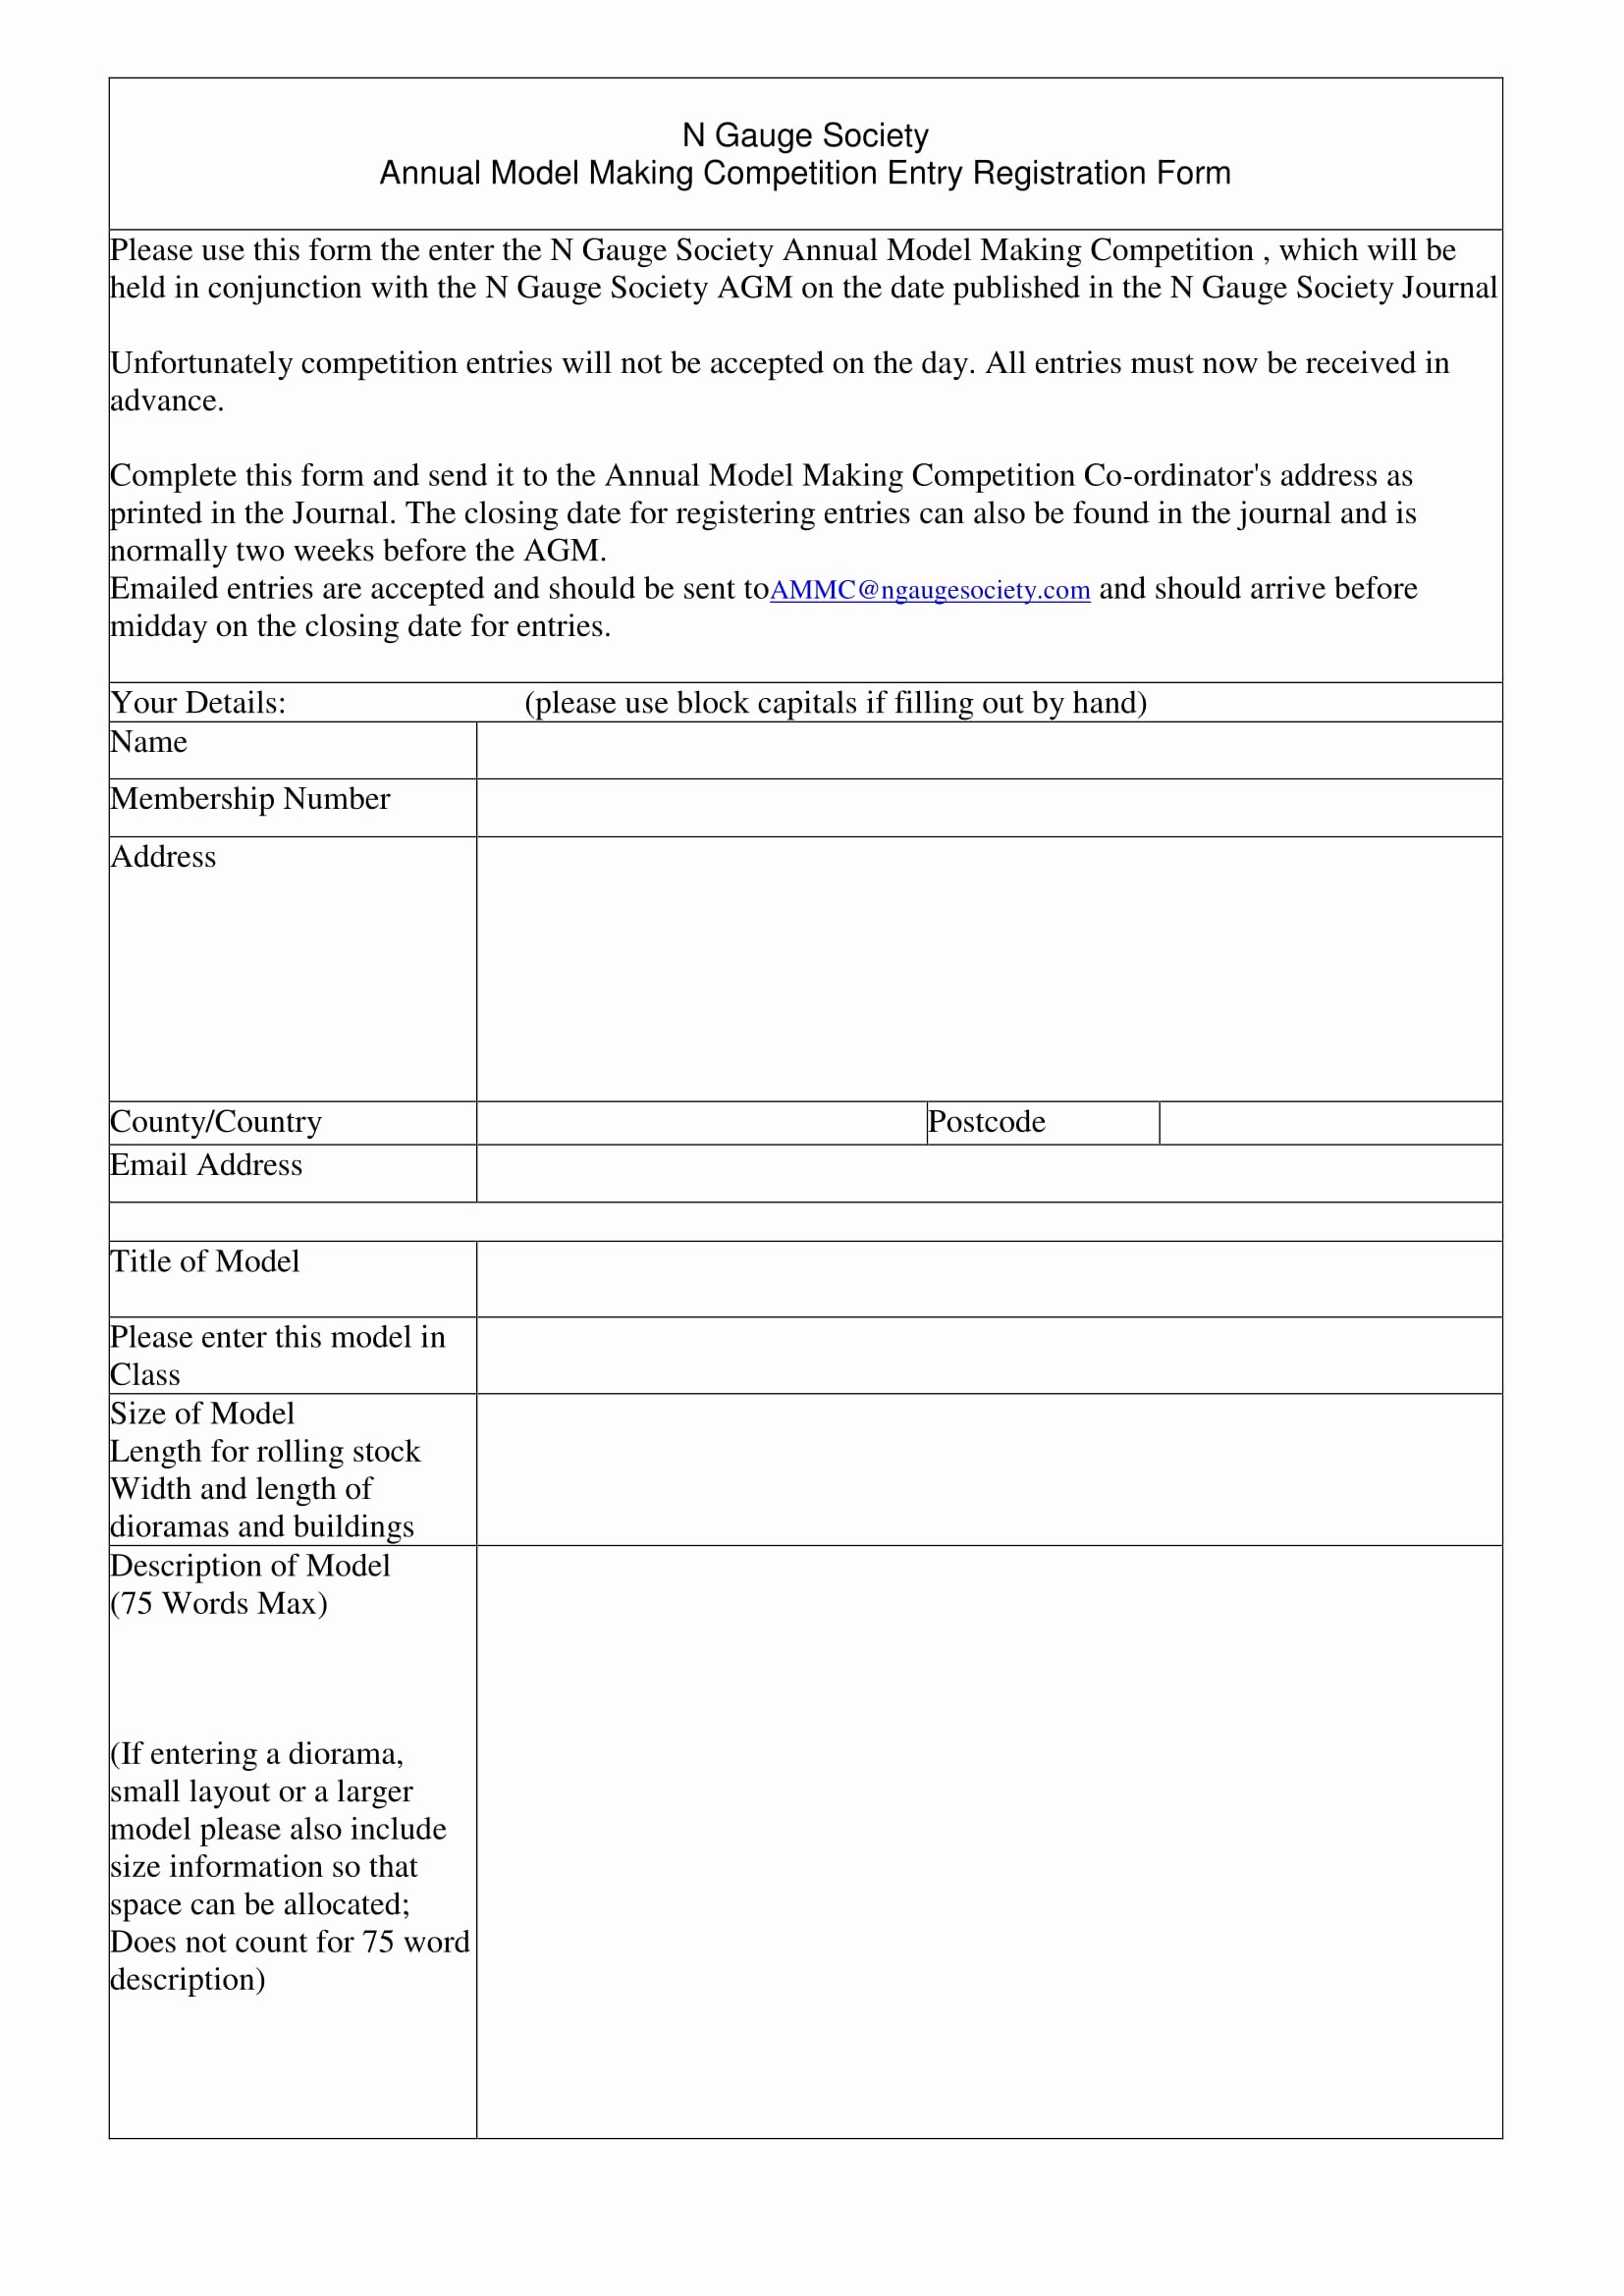 Contest Entry form Template Word Elegant 7 Examples Of Petition Entry Registration form